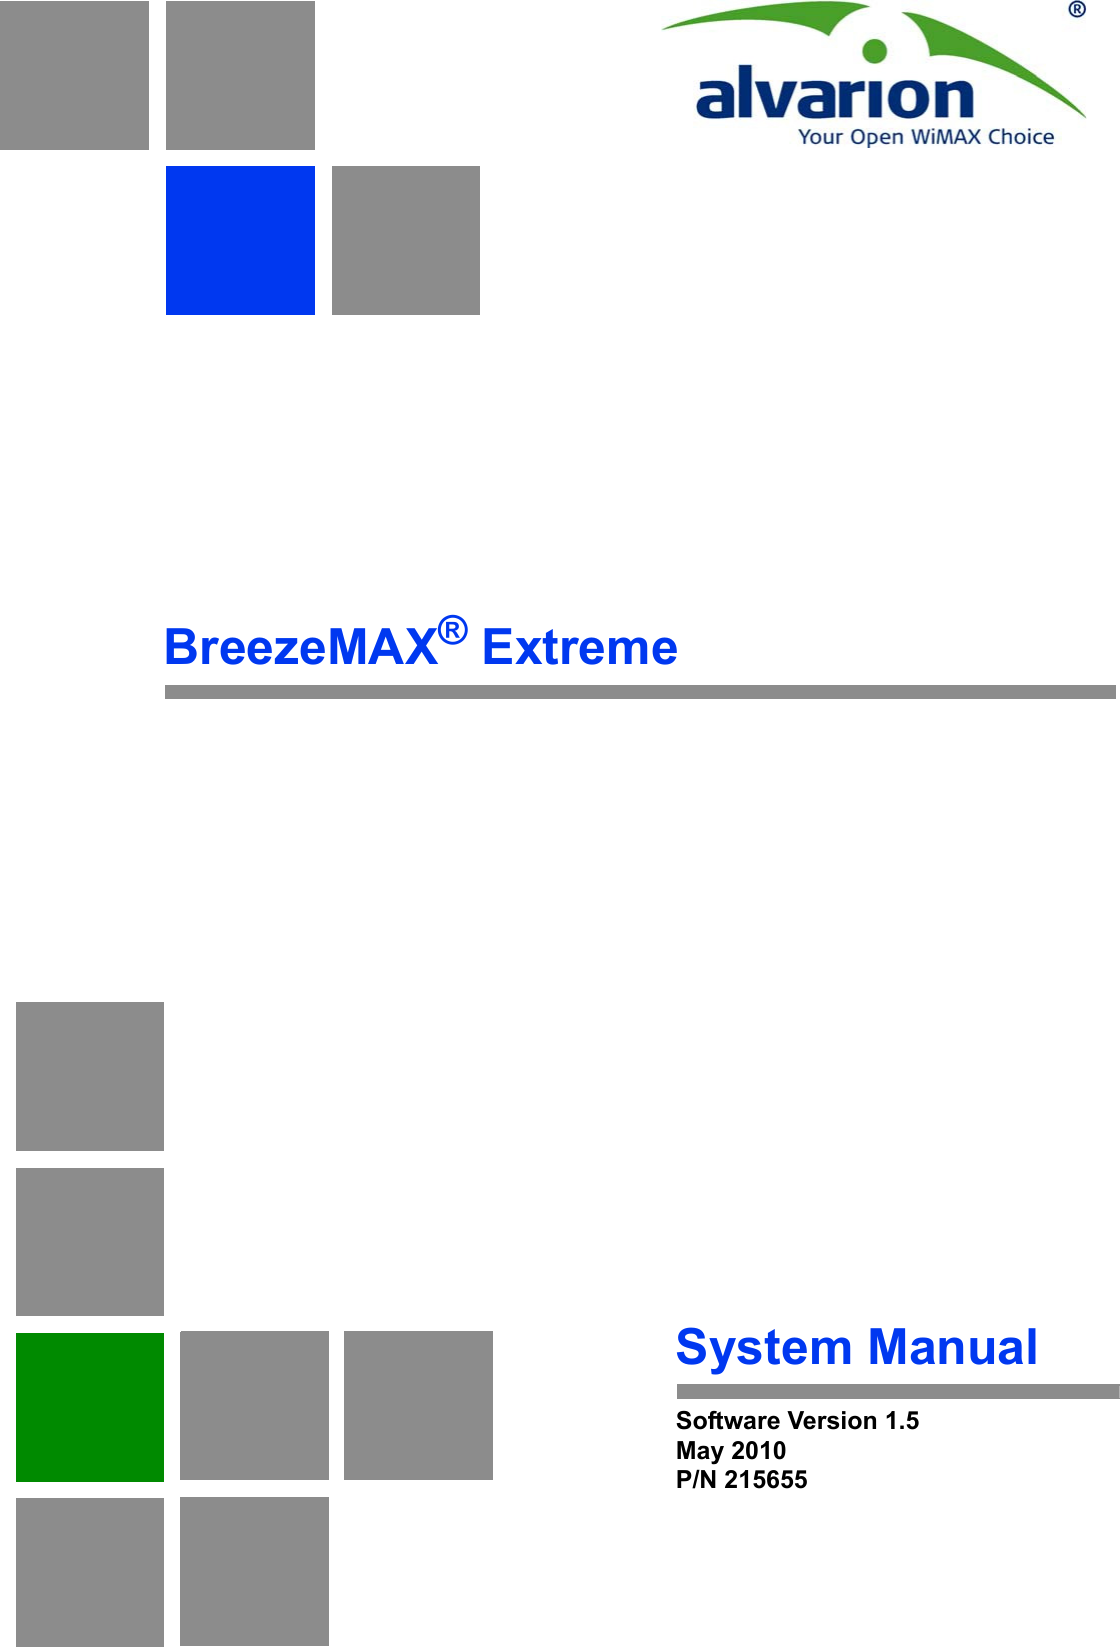 BreezeMAX® ExtremeSystem ManualSoftware Version 1.5May 2010P/N 215655